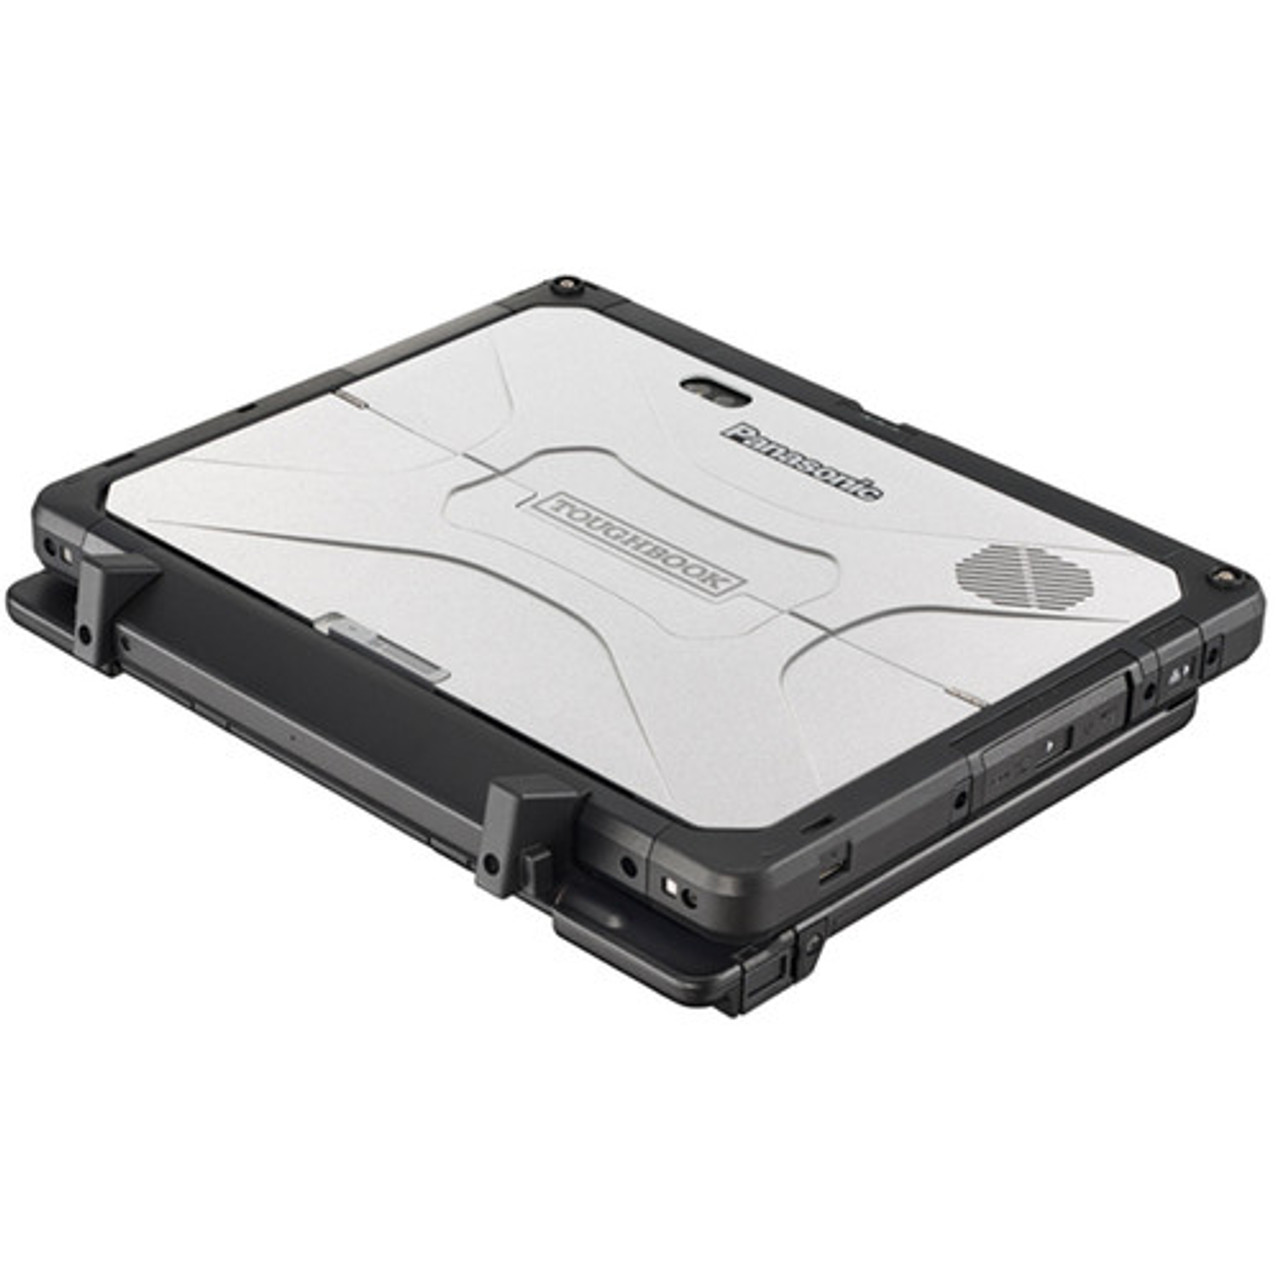 12" Fully Rugged Toughbook 33 - REF (special offer)